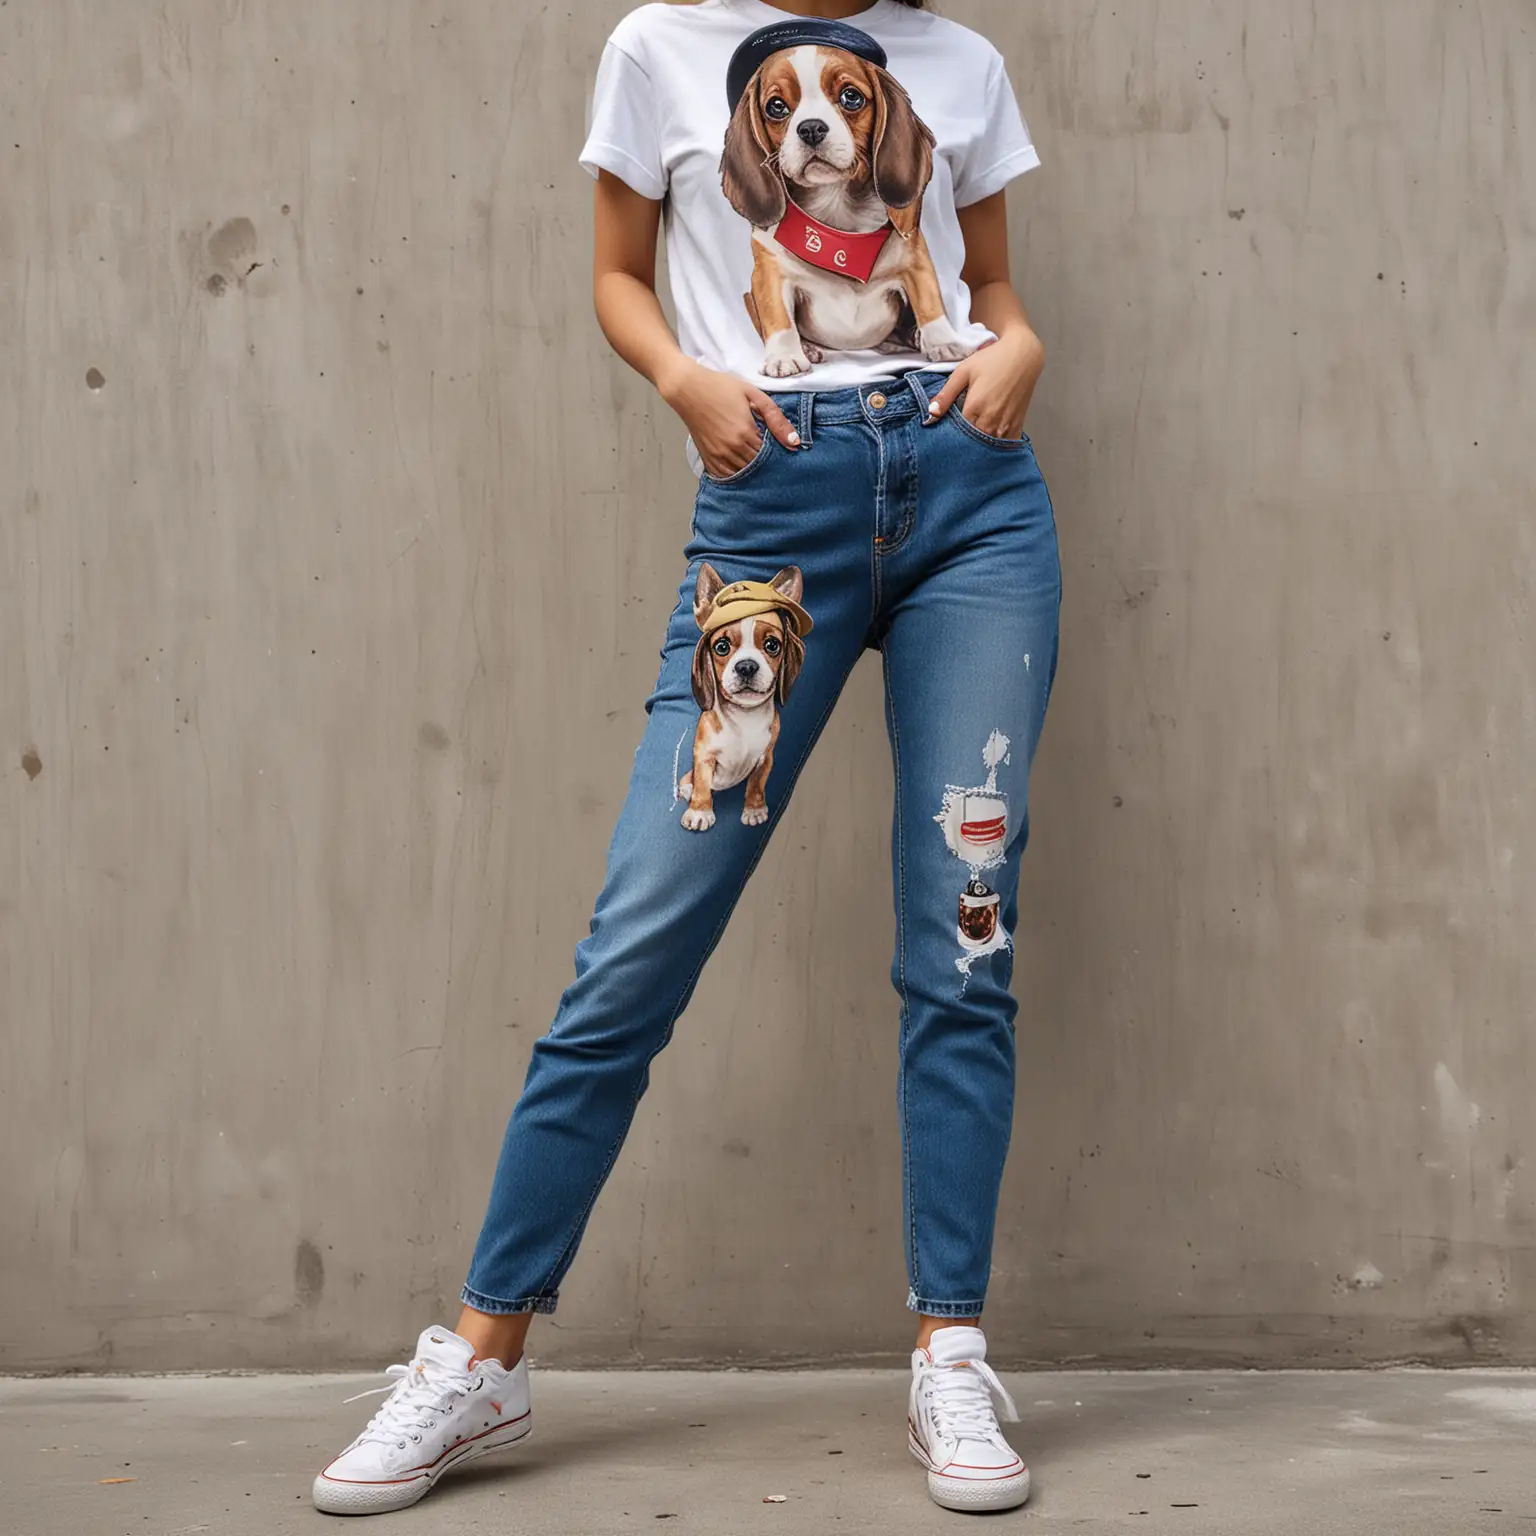 women wearing denim jeans, with painting of cute puppy at front, with long ears and hat